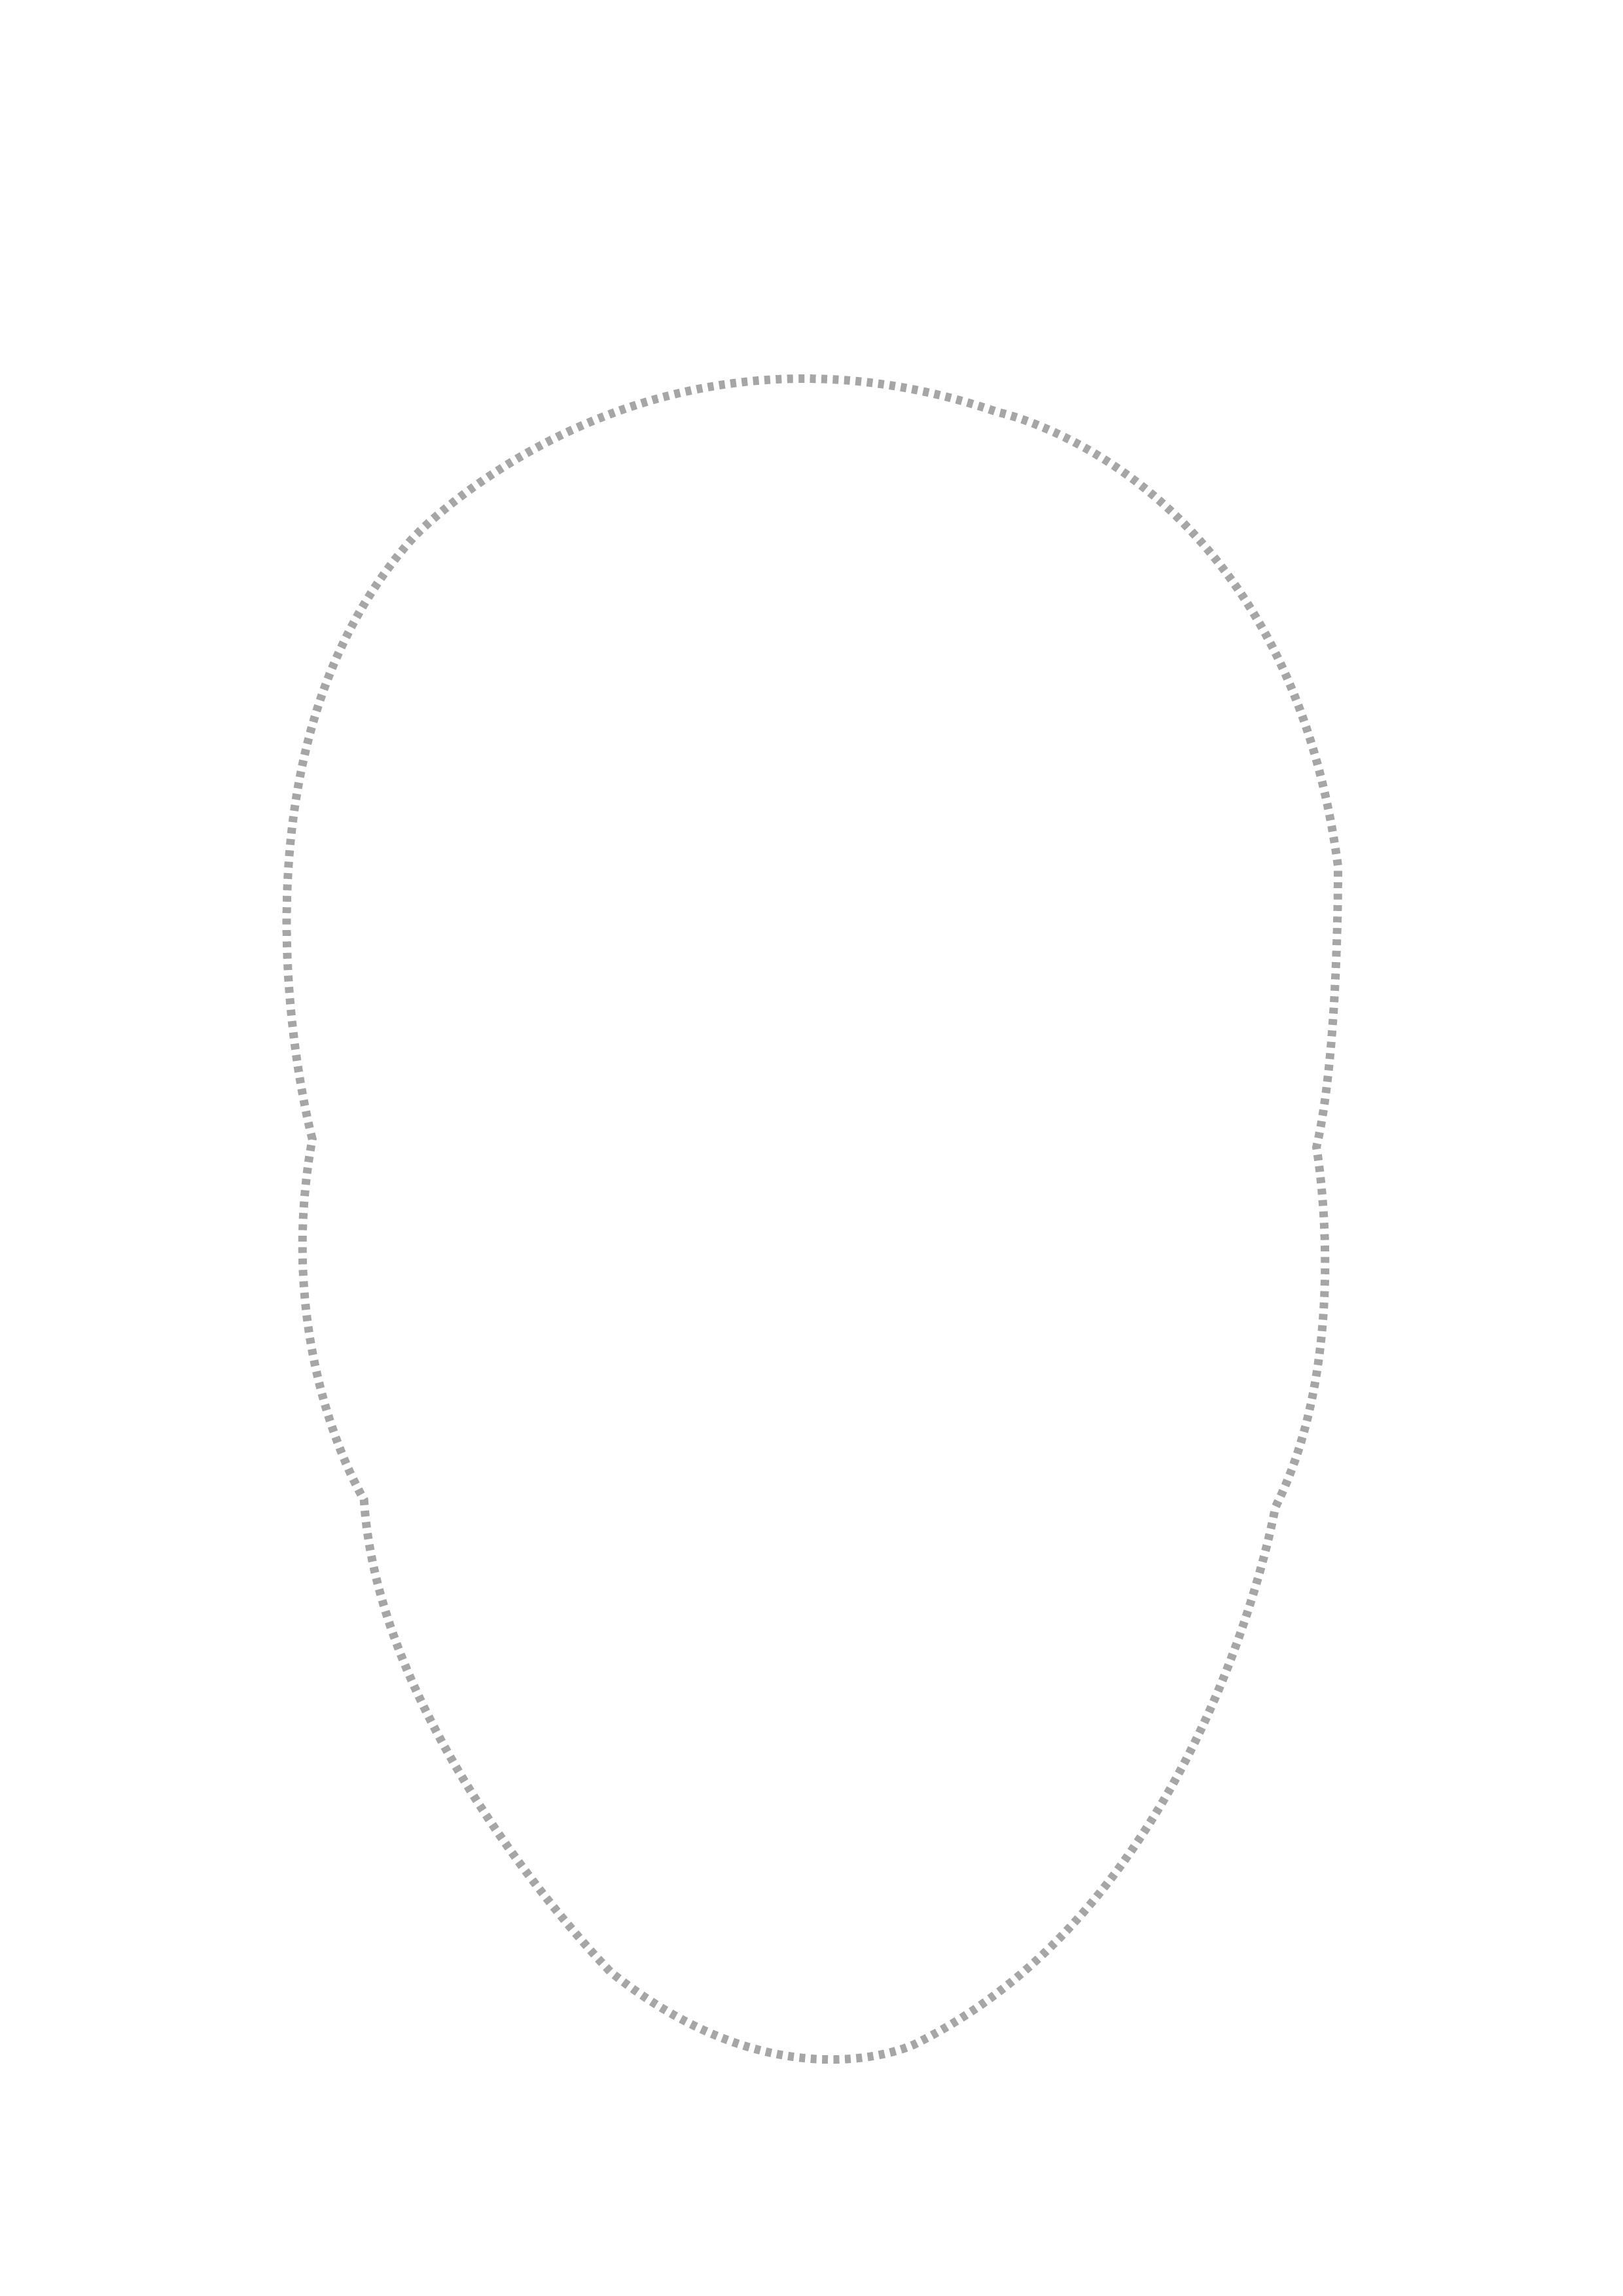 Face Outline Template Cliparts.co